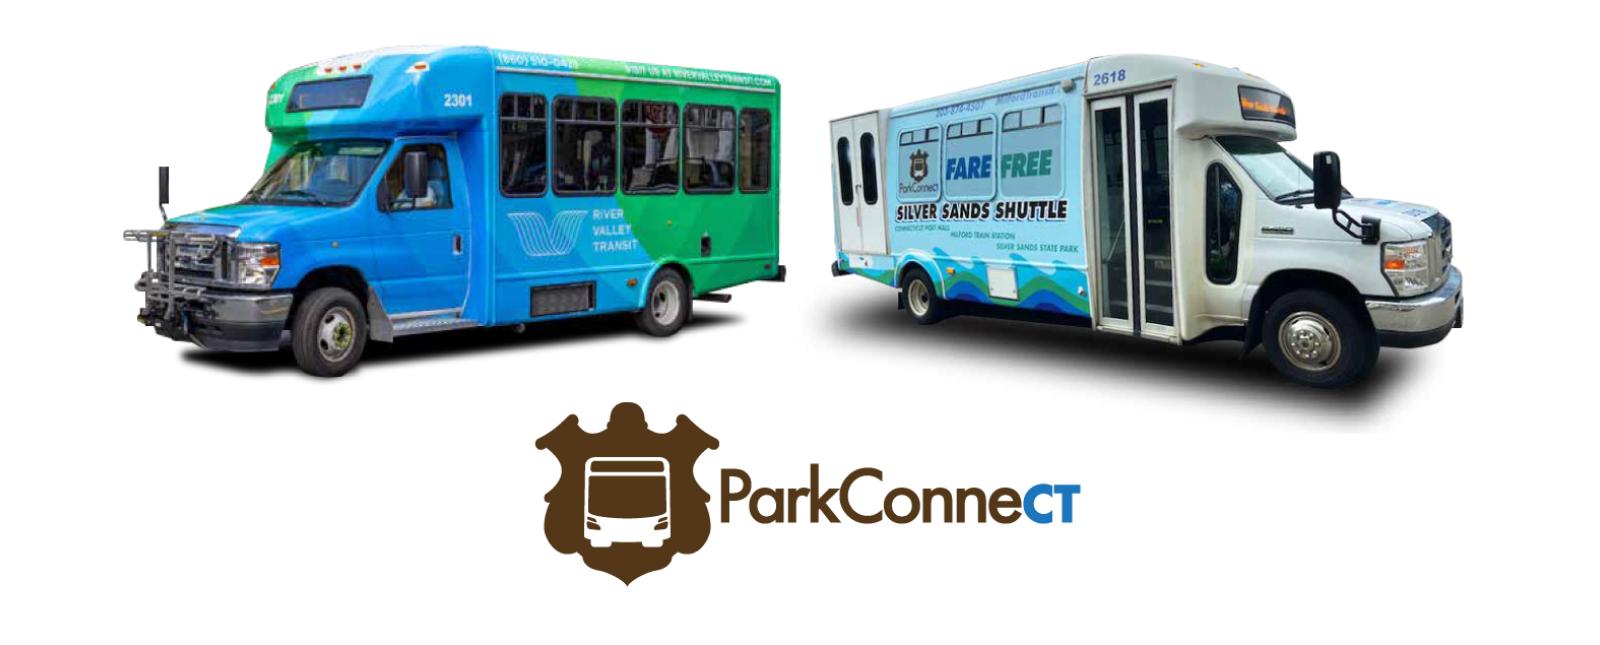 ParkConneCT buses hero